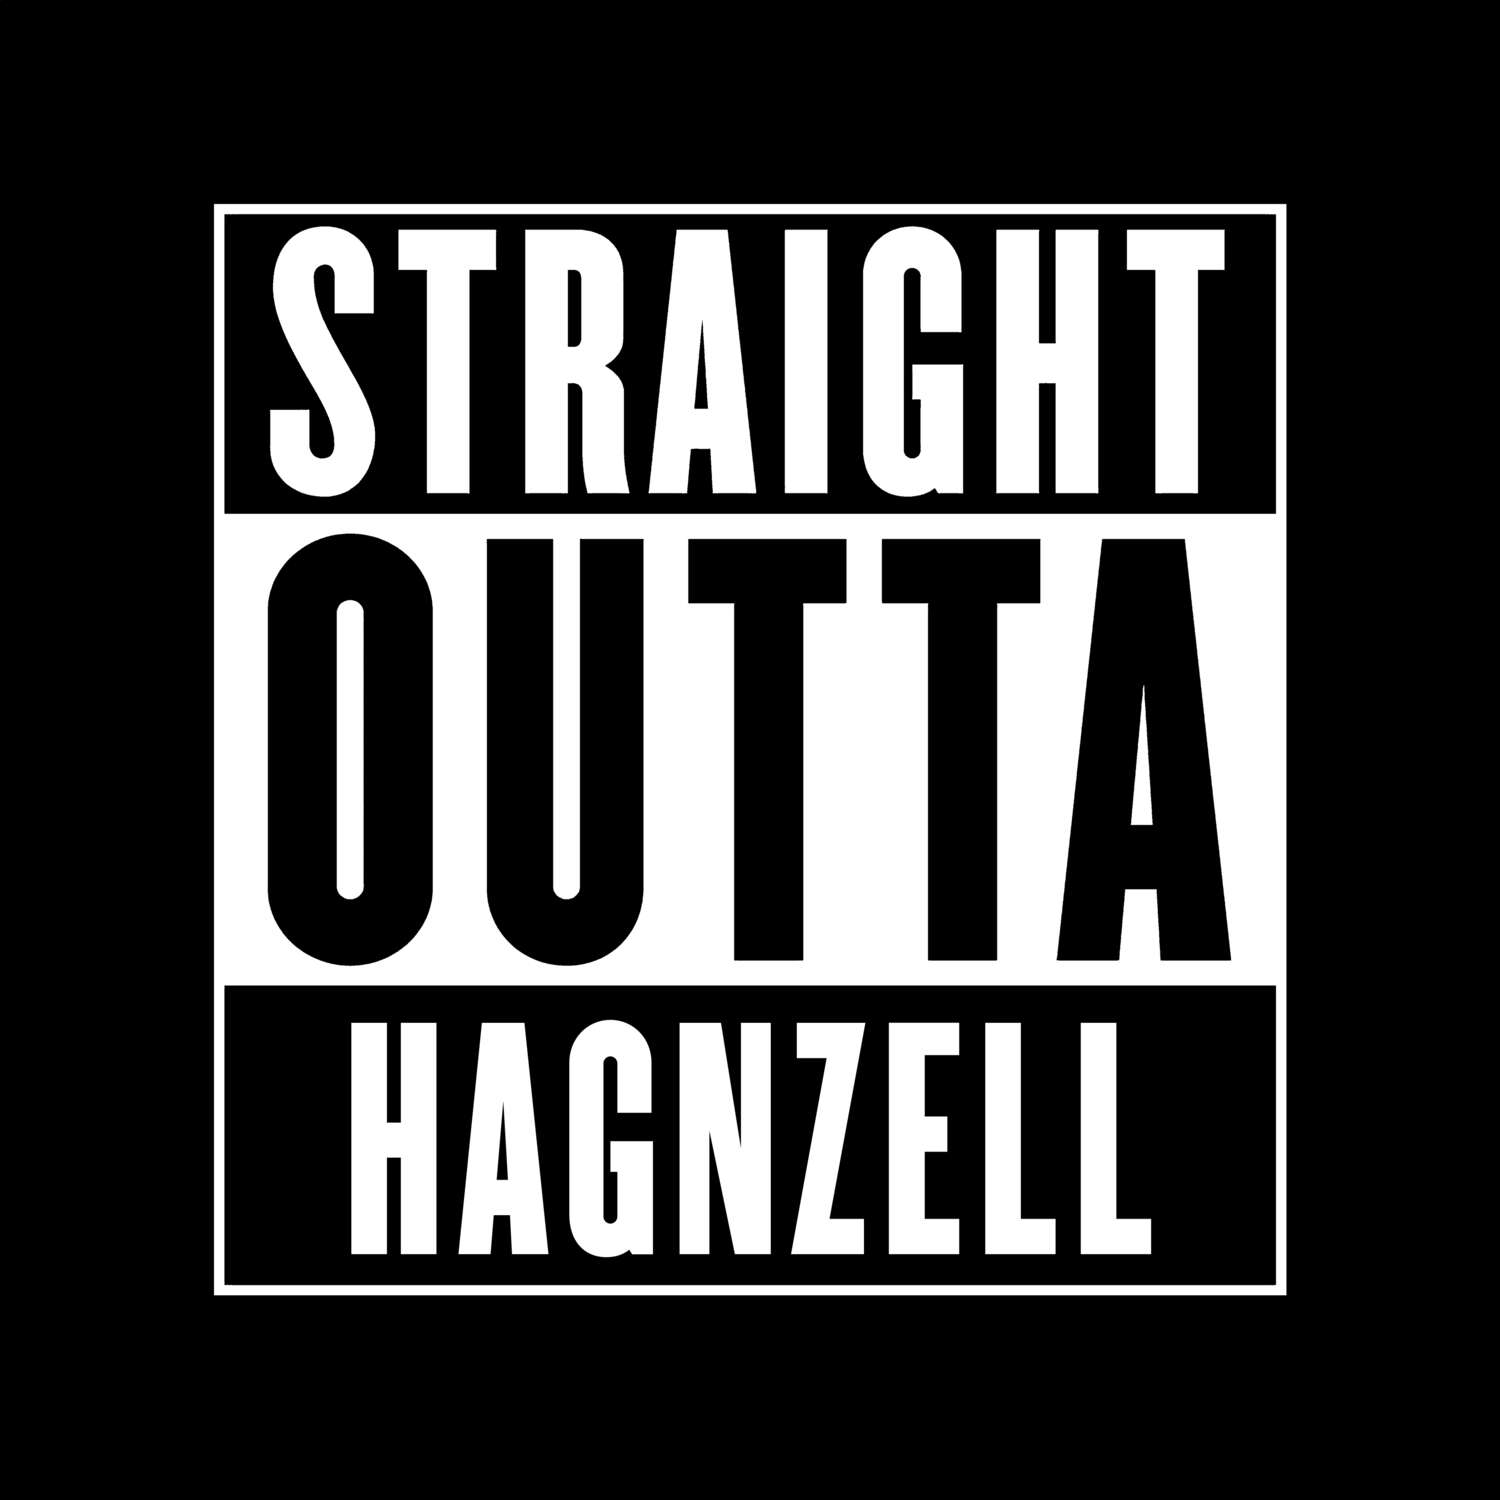 Hagnzell T-Shirt »Straight Outta«